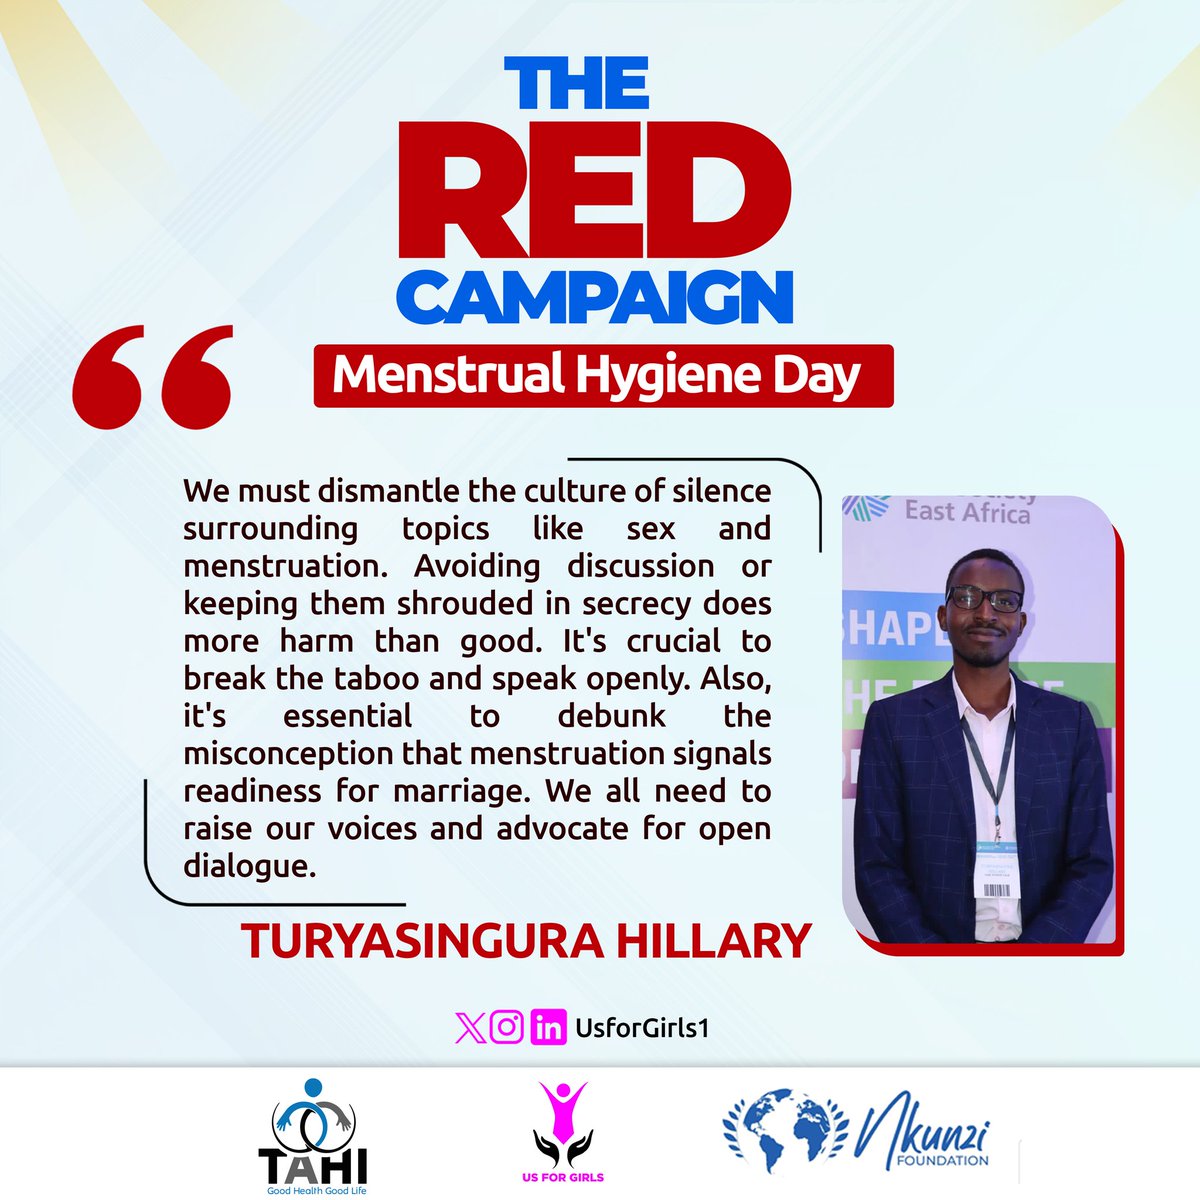 #RedCampaign

@Hillaryturyas urges us to dismantle the culture of silence surrounding topics like sex and menstruation, that are often shrouded in secrecy; which ends up doing more harm than good.
It is crucial to break the taboo and advocate for open dialogue.

#EndPeriodStigma